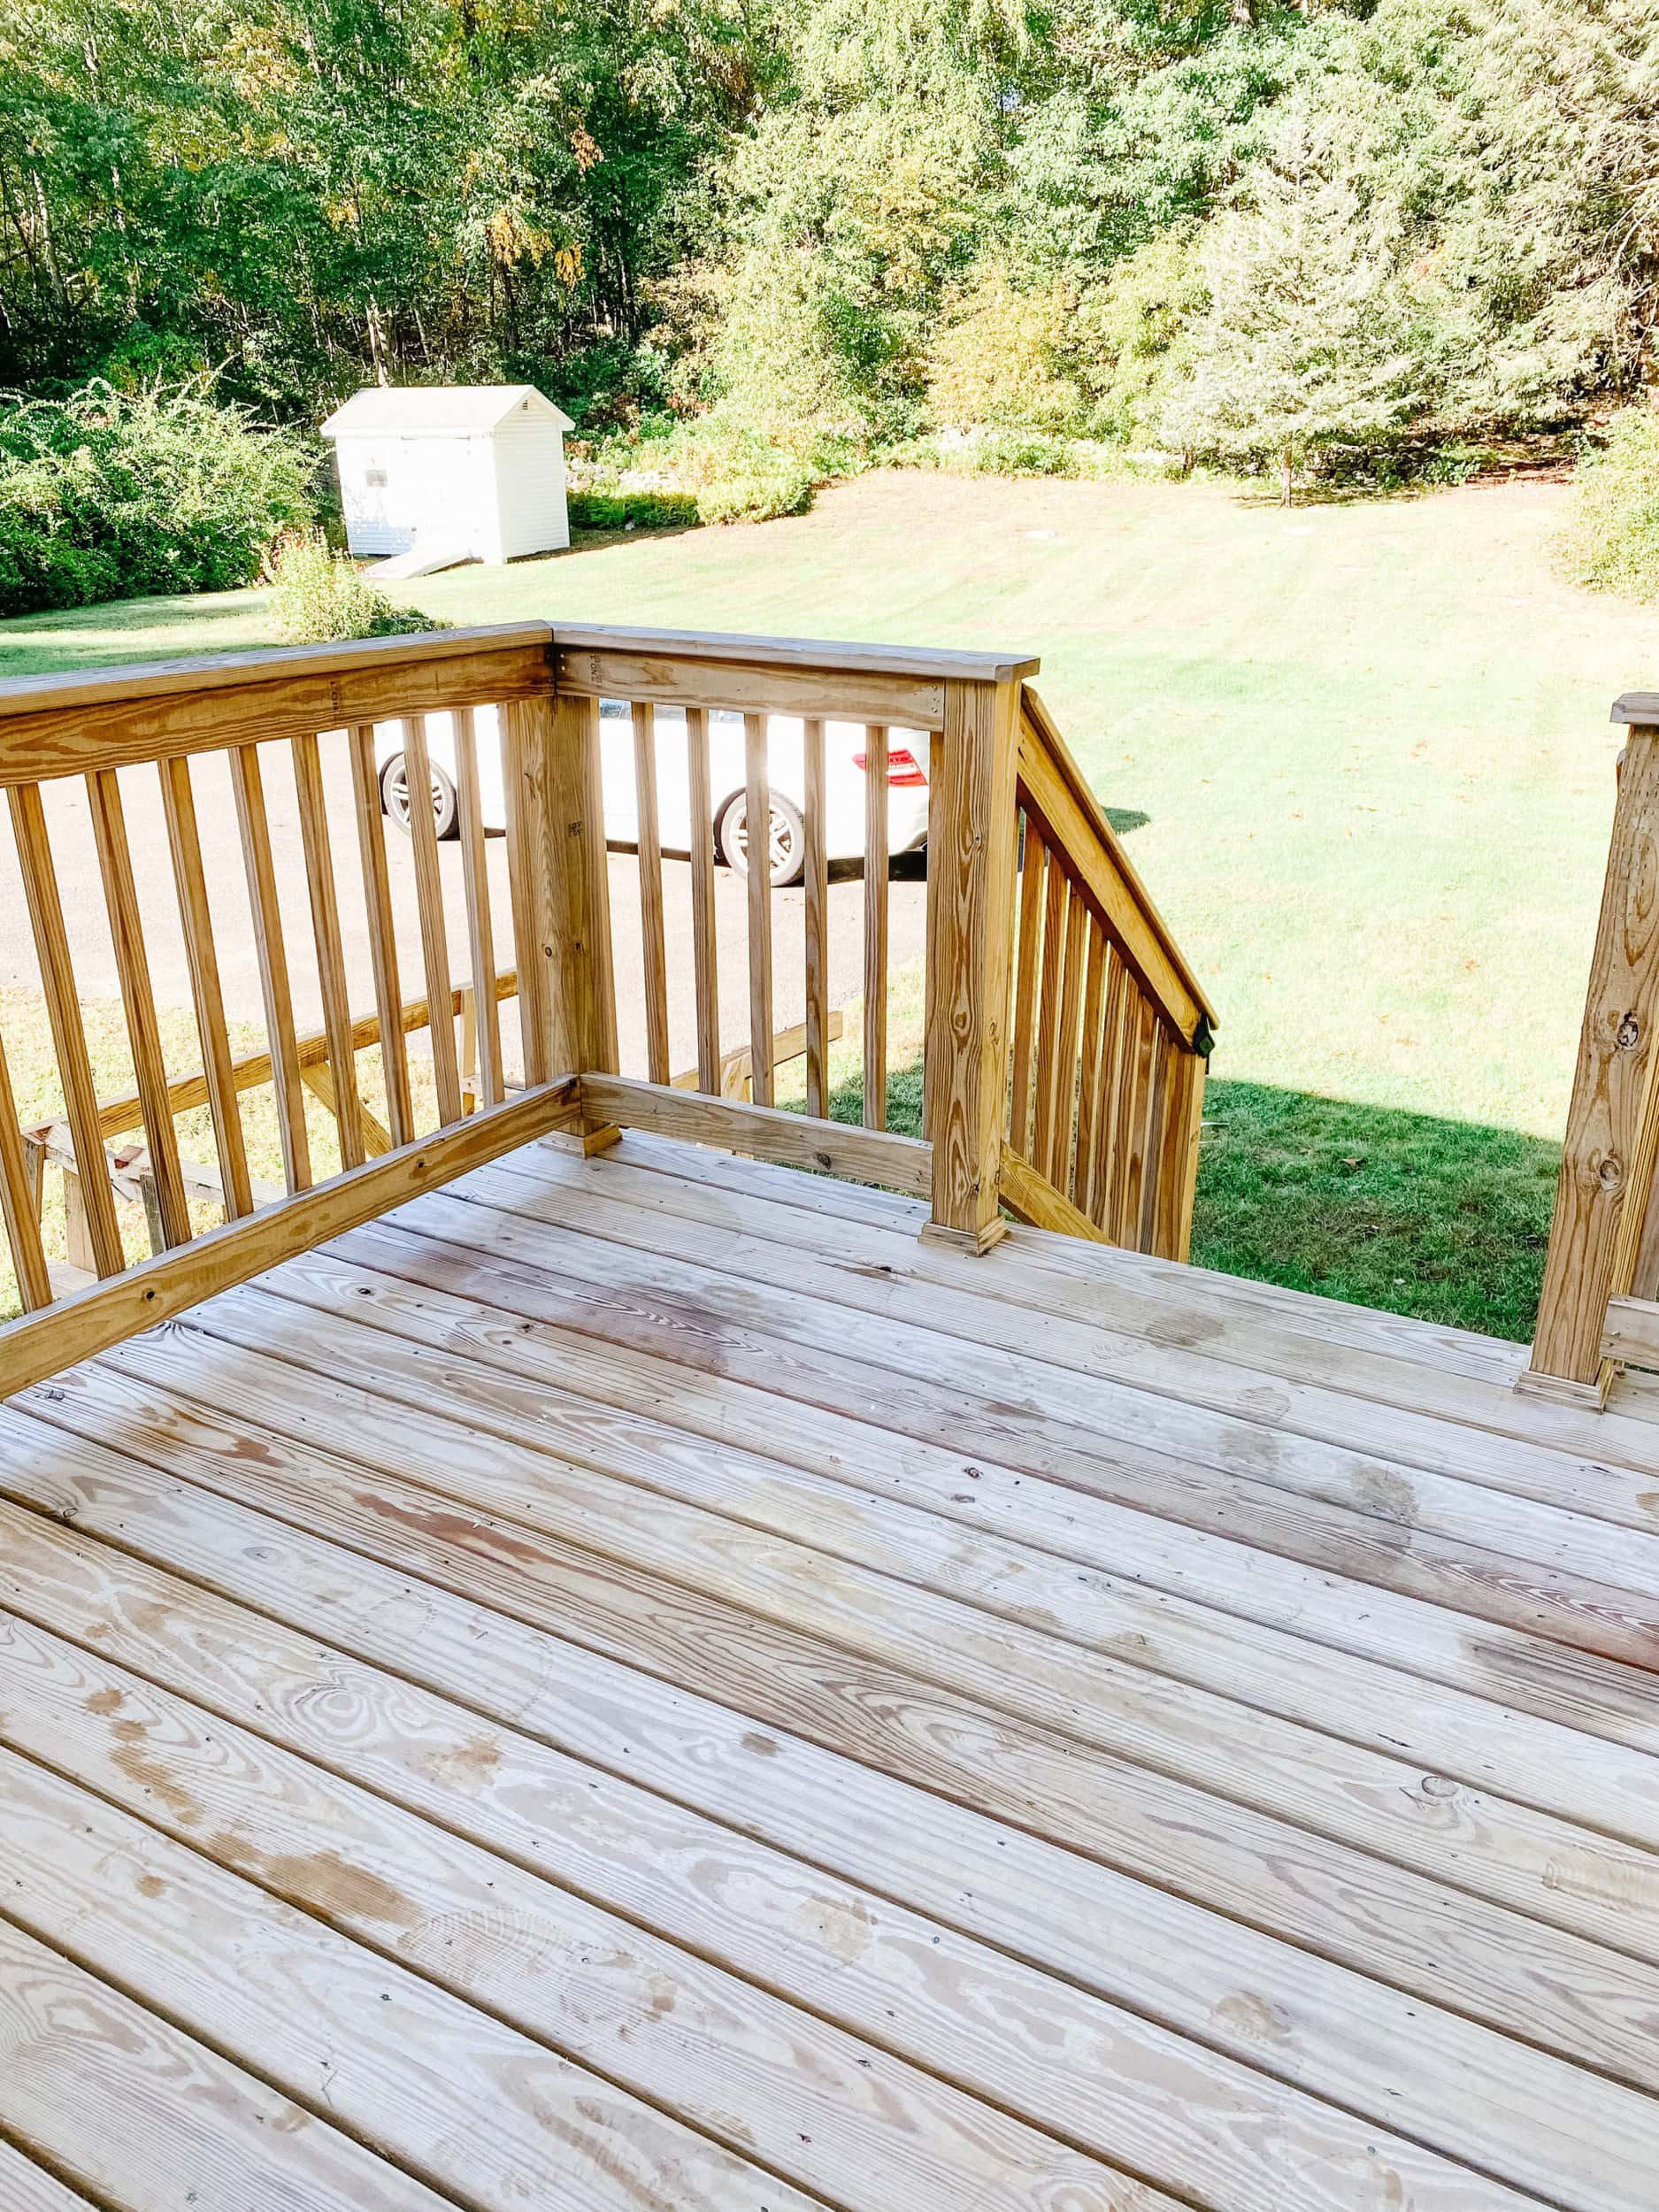 Pressure treated wood deck stained with sherwin williams superdeck in pure white and impossible gray 